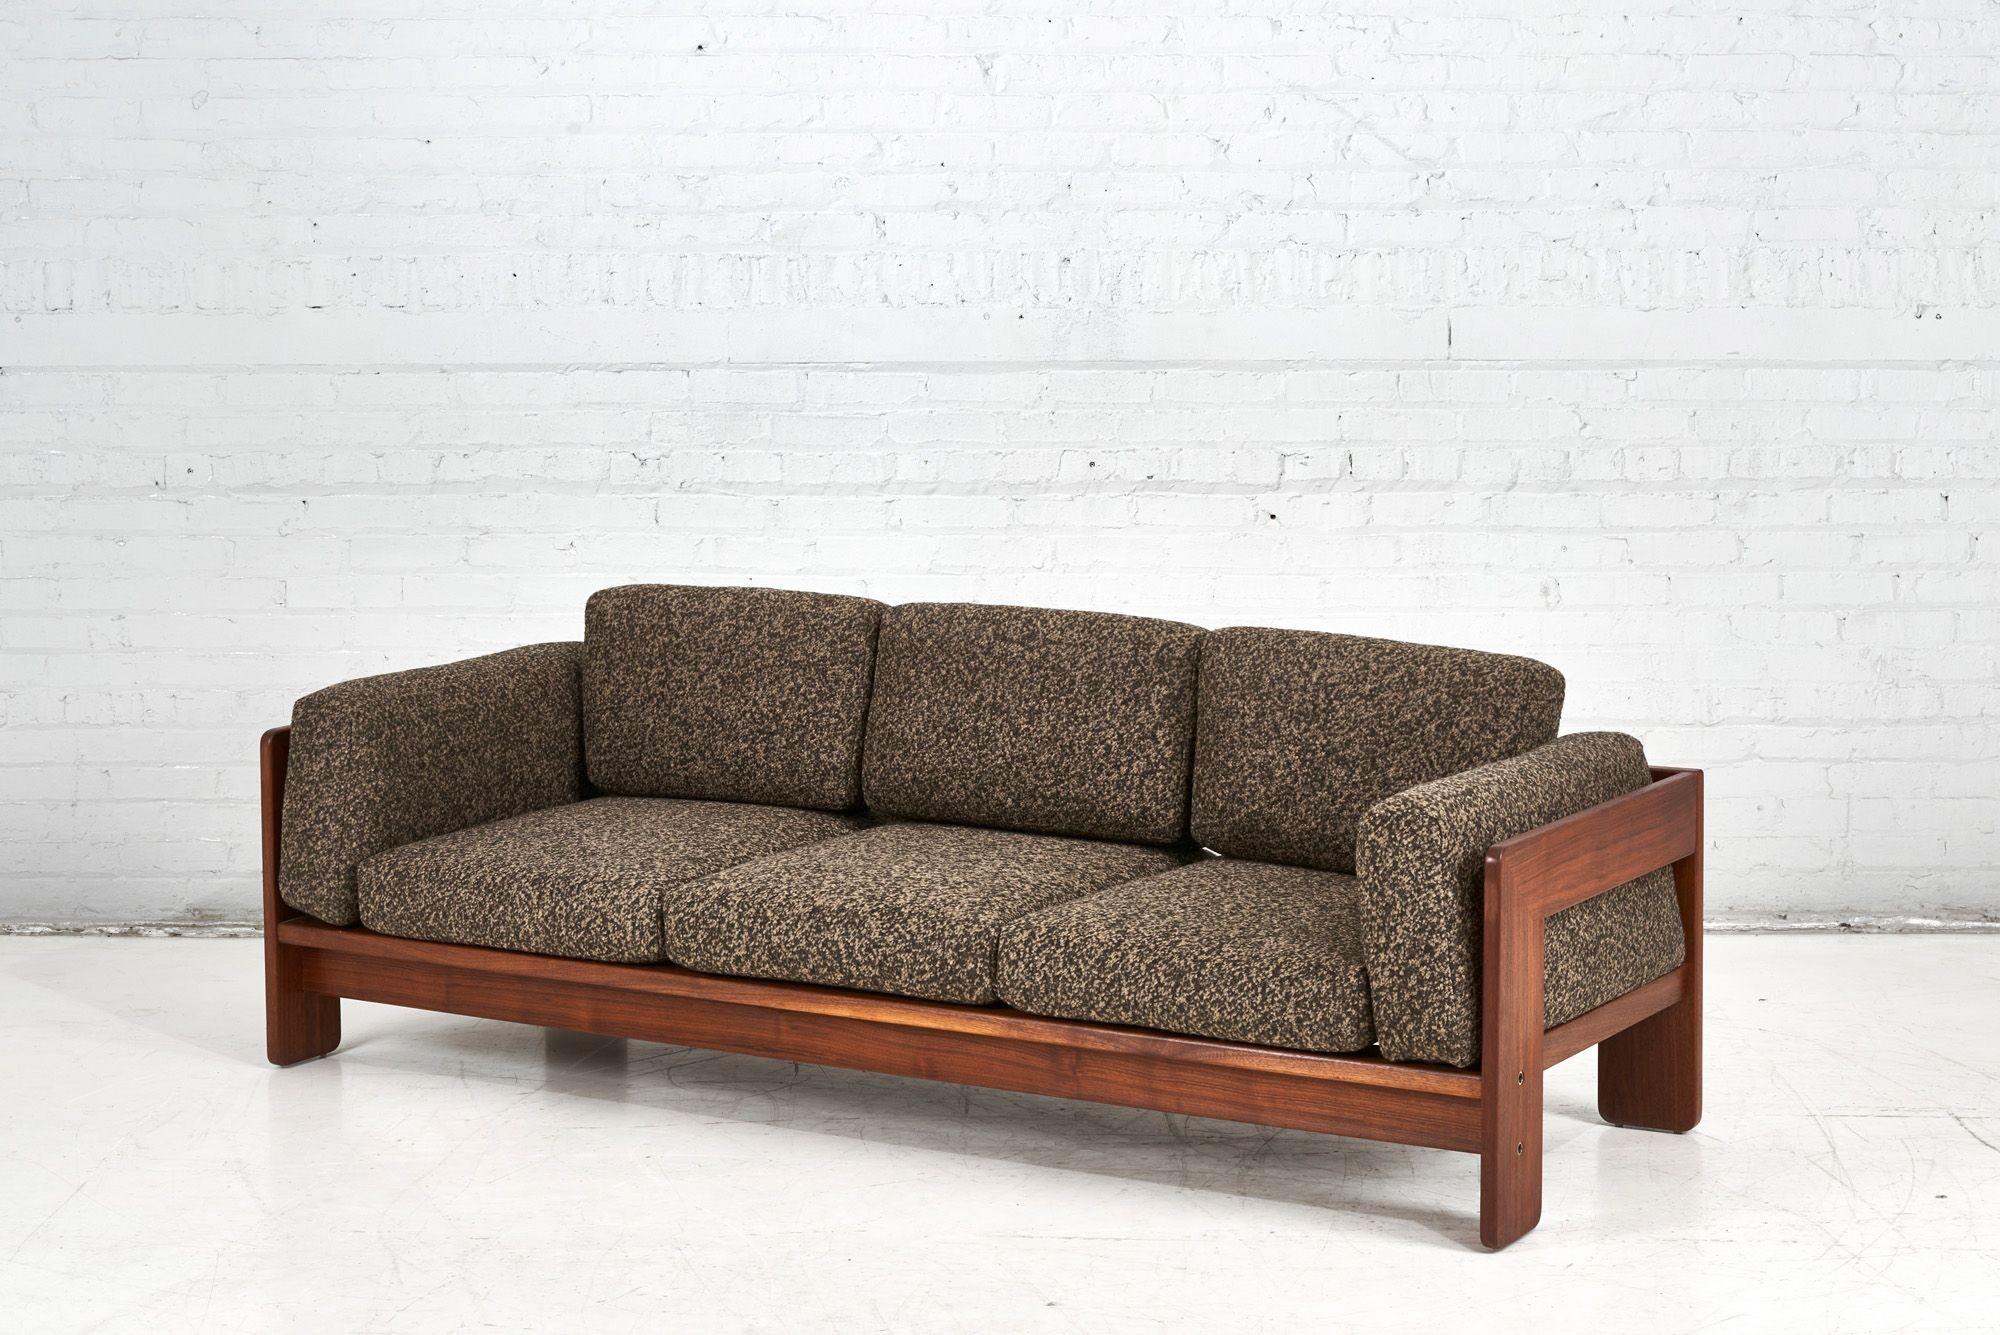 Bastiano Sofa by Tobia Scarpa for Gavina, Italy 1970s. Sofa has been completely restored and reupholstered in a nubby boucle. Pair of lounge chairs sold in separate listing.